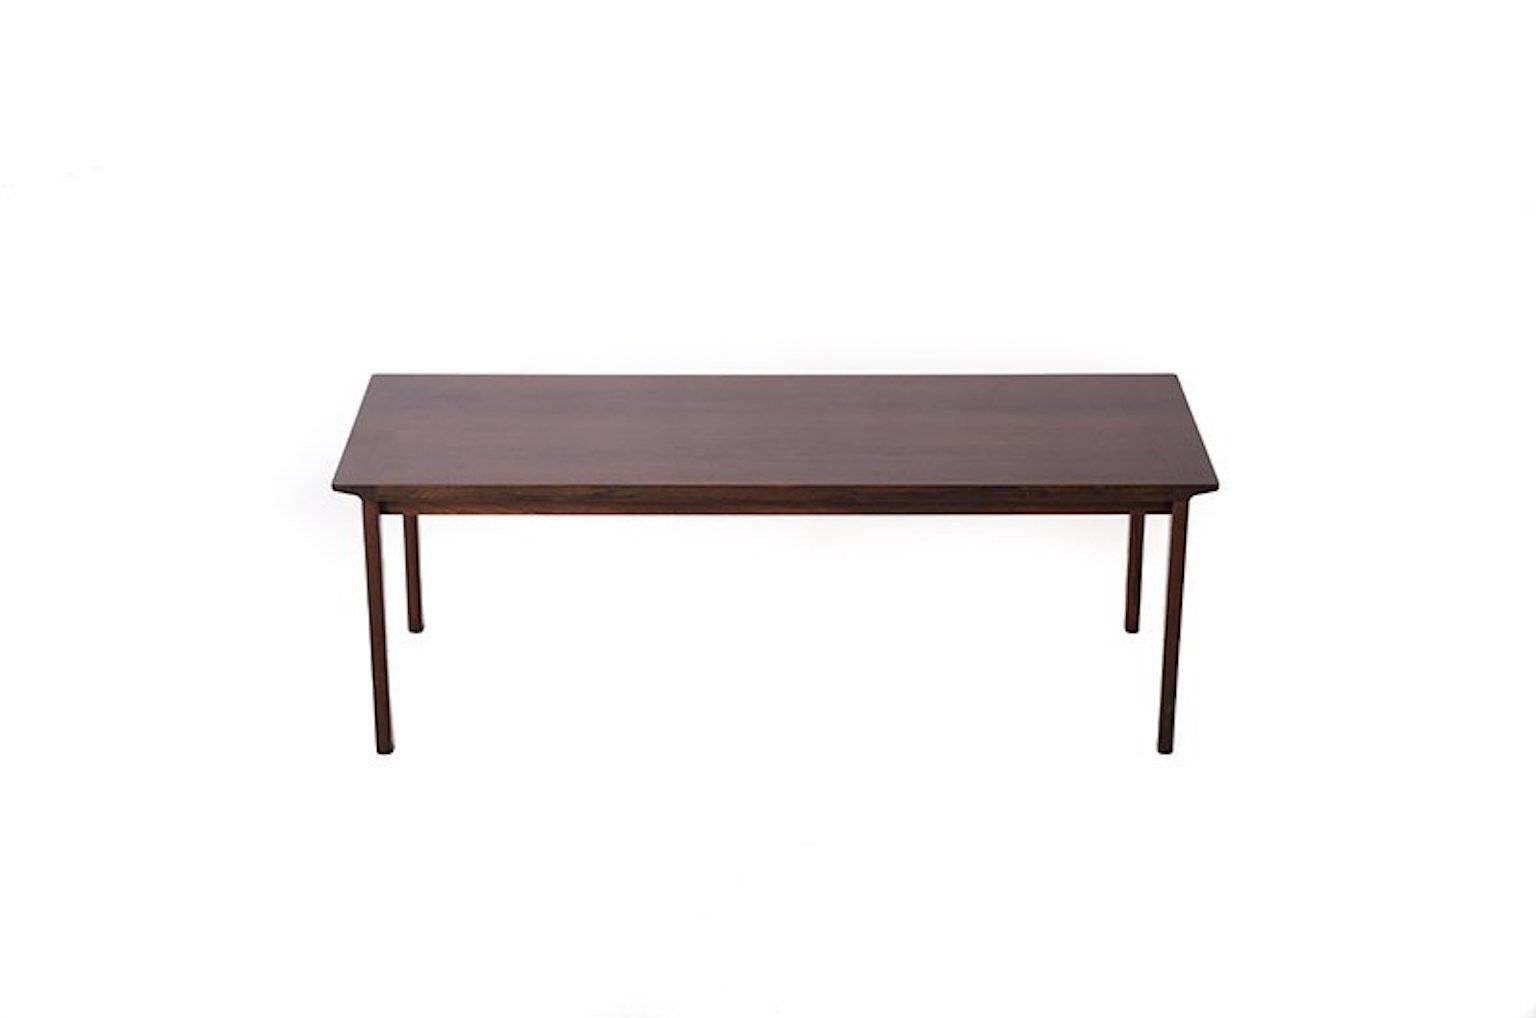 Beautifully restored rosewood coffee table designed by Hans Olsen.

Professional, skilled furniture restoration is an integral part of what we do every day. Our goal is to provide beautiful, functional furniture that honors its illustrious past.